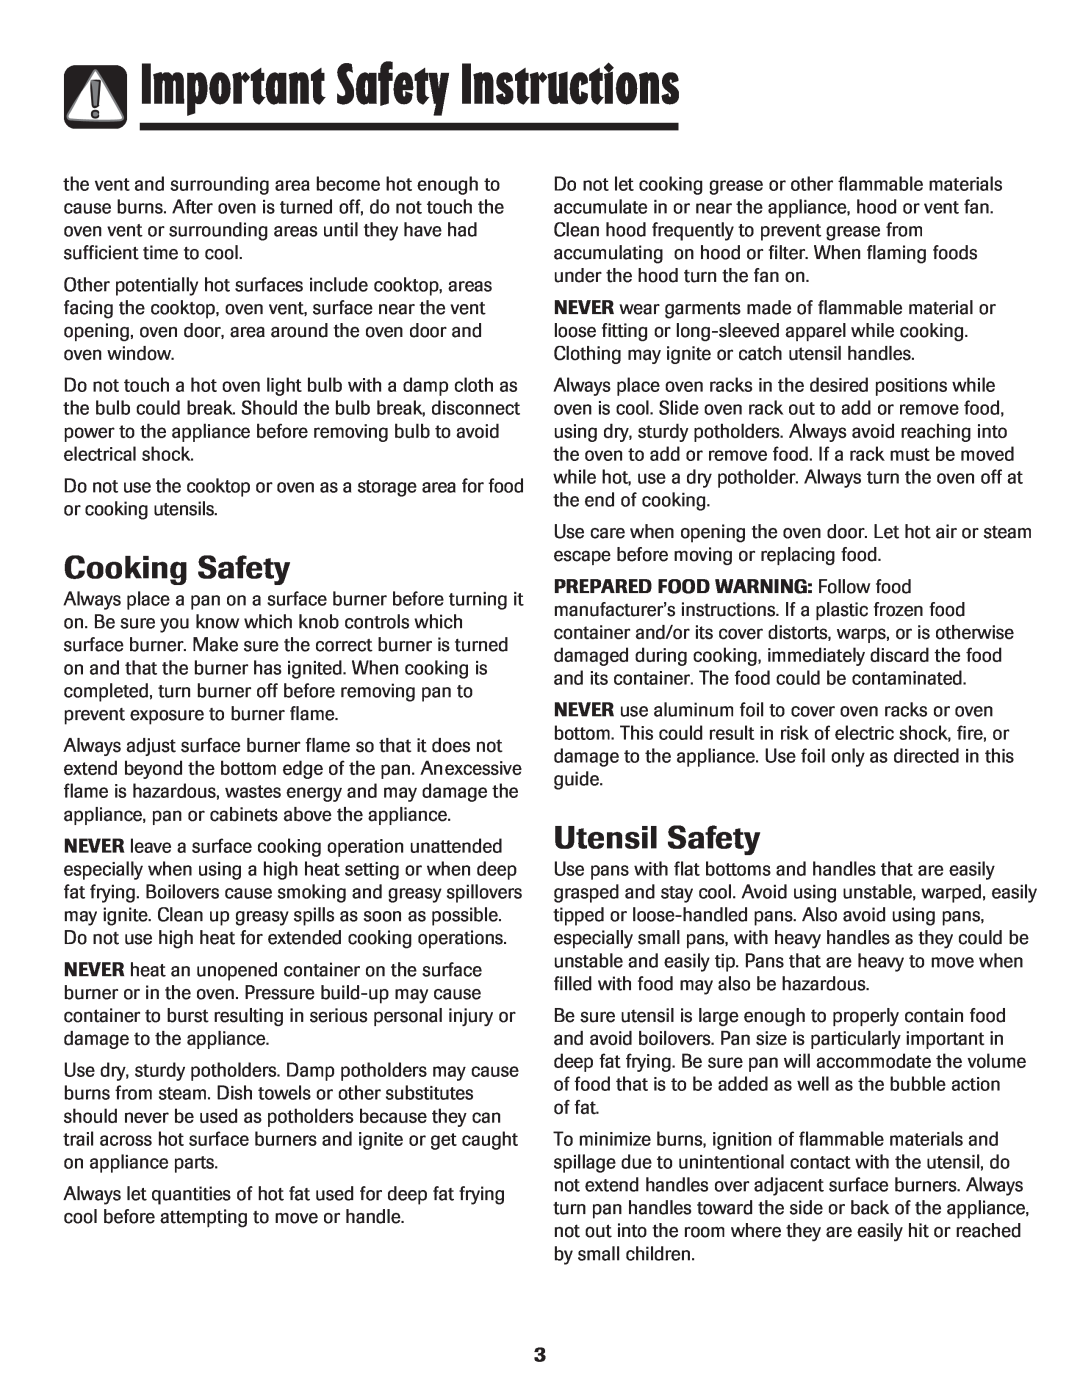 Maytag 700 manual Cooking Safety, Utensil Safety, Important Safety Instructions 